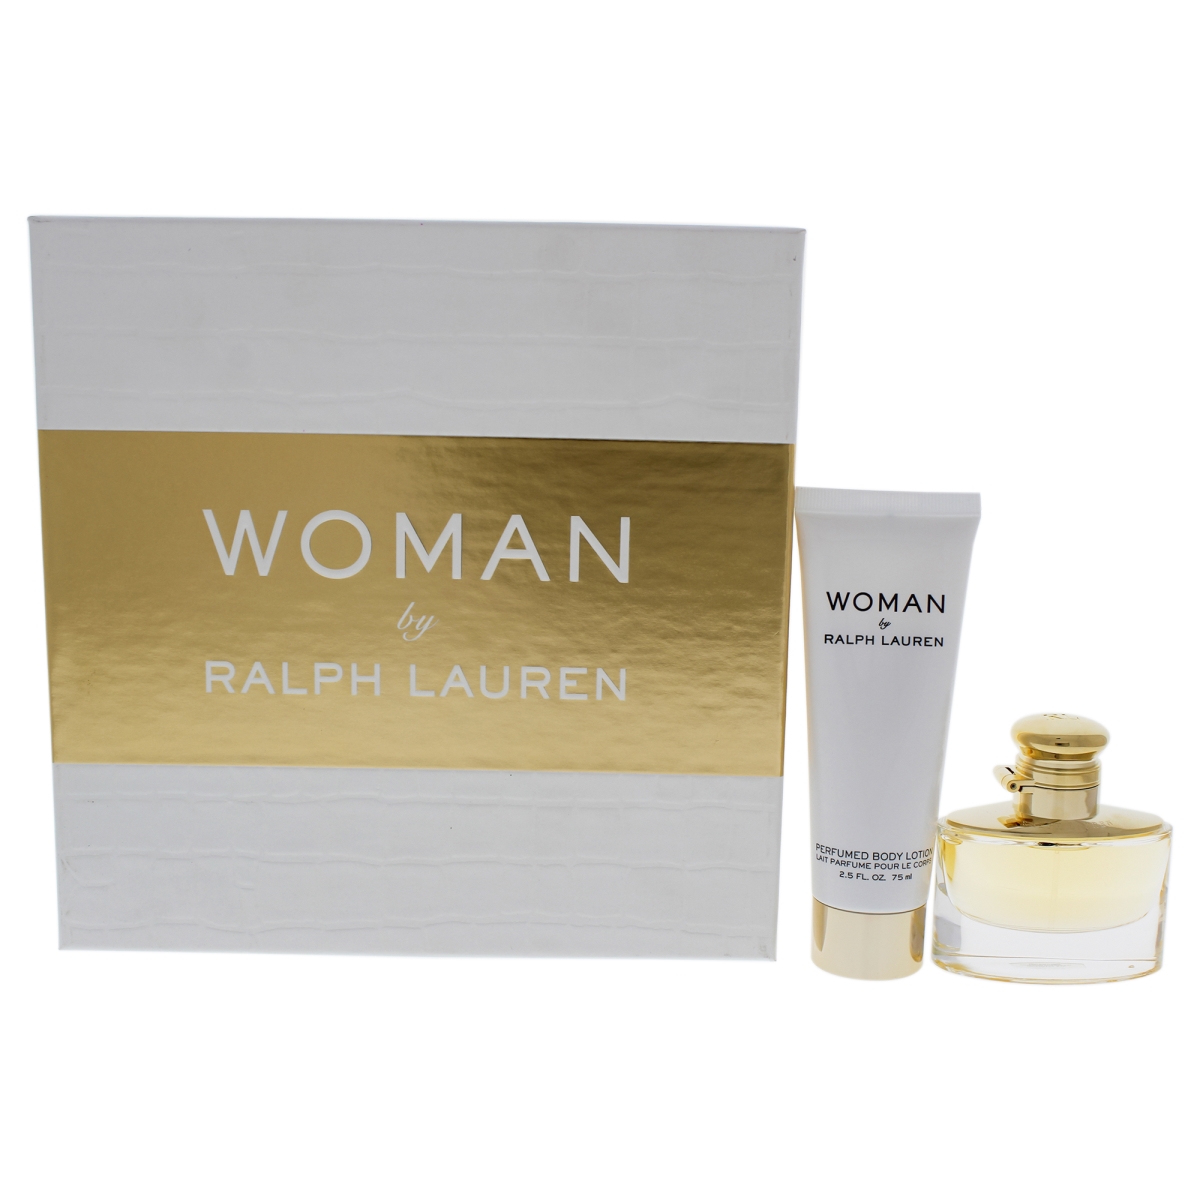 I0091320 Woman Gift Set For Women - 2 Piece